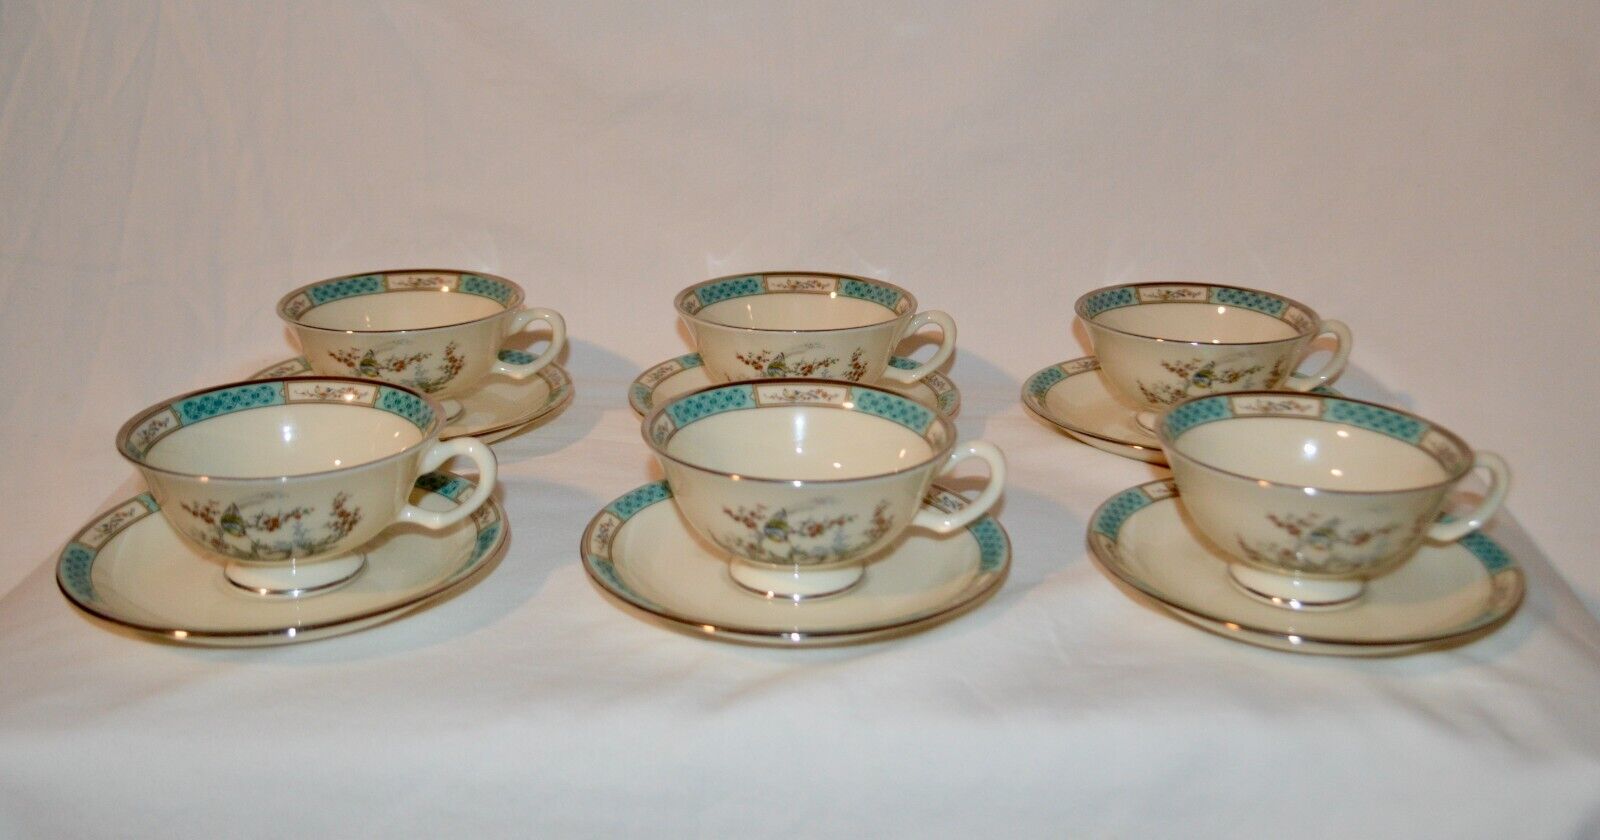 Lenox Bone China Plum Blossoms Vintage Footed Cup & Saucer (Set of 6)